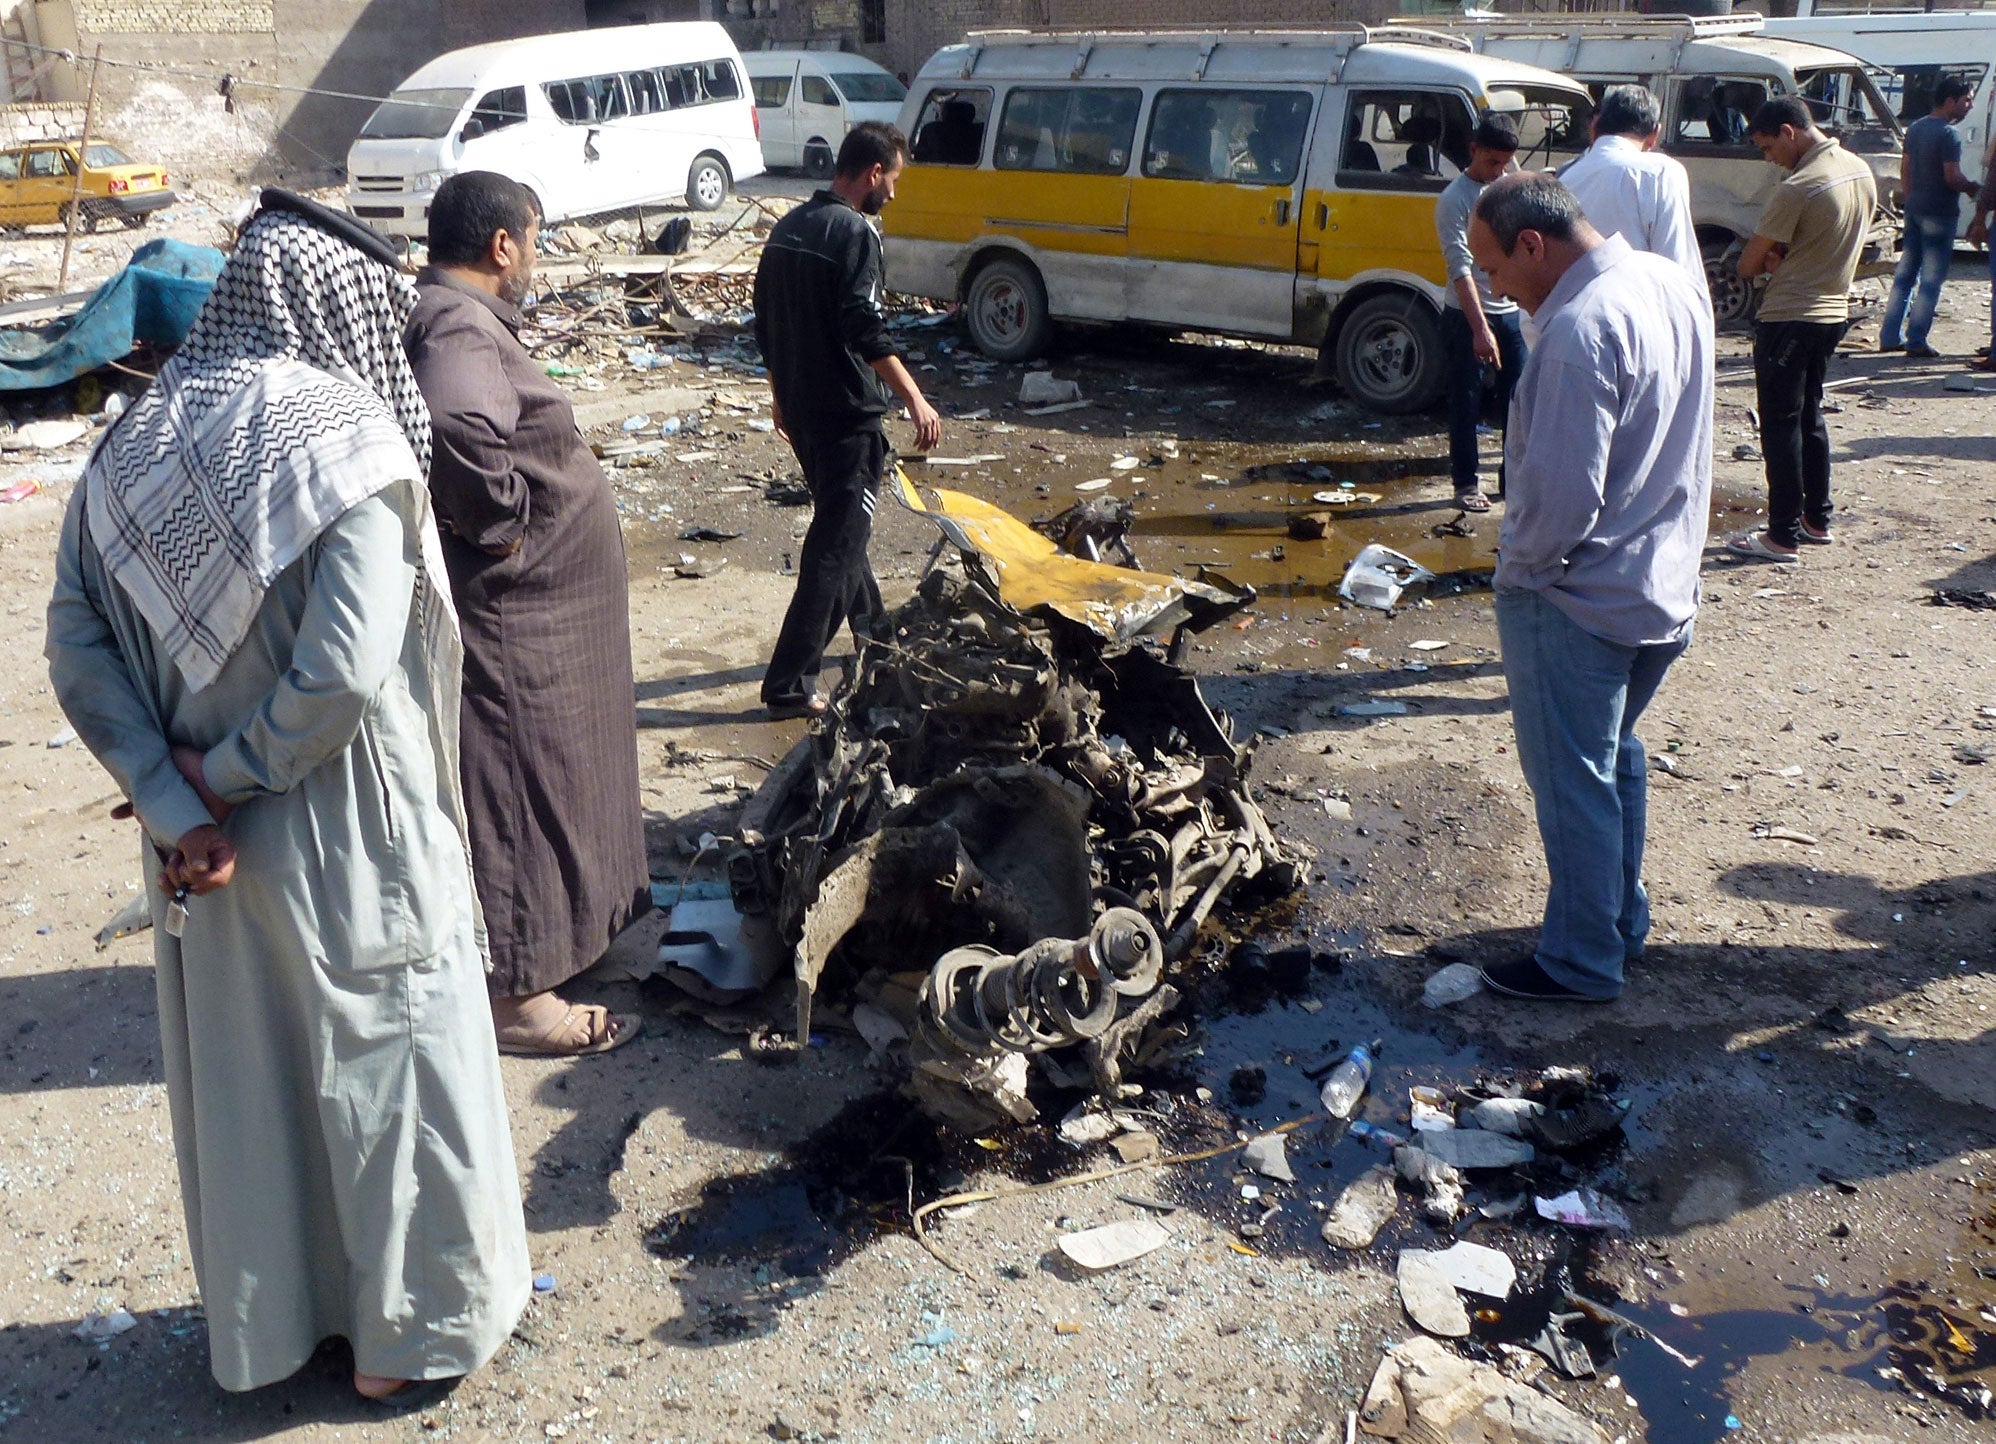 Iraqis look at the remains of a vehicle following an explosion at a small bus station on October 27, 2013, in the the Mashtal district of the capital Baghdad